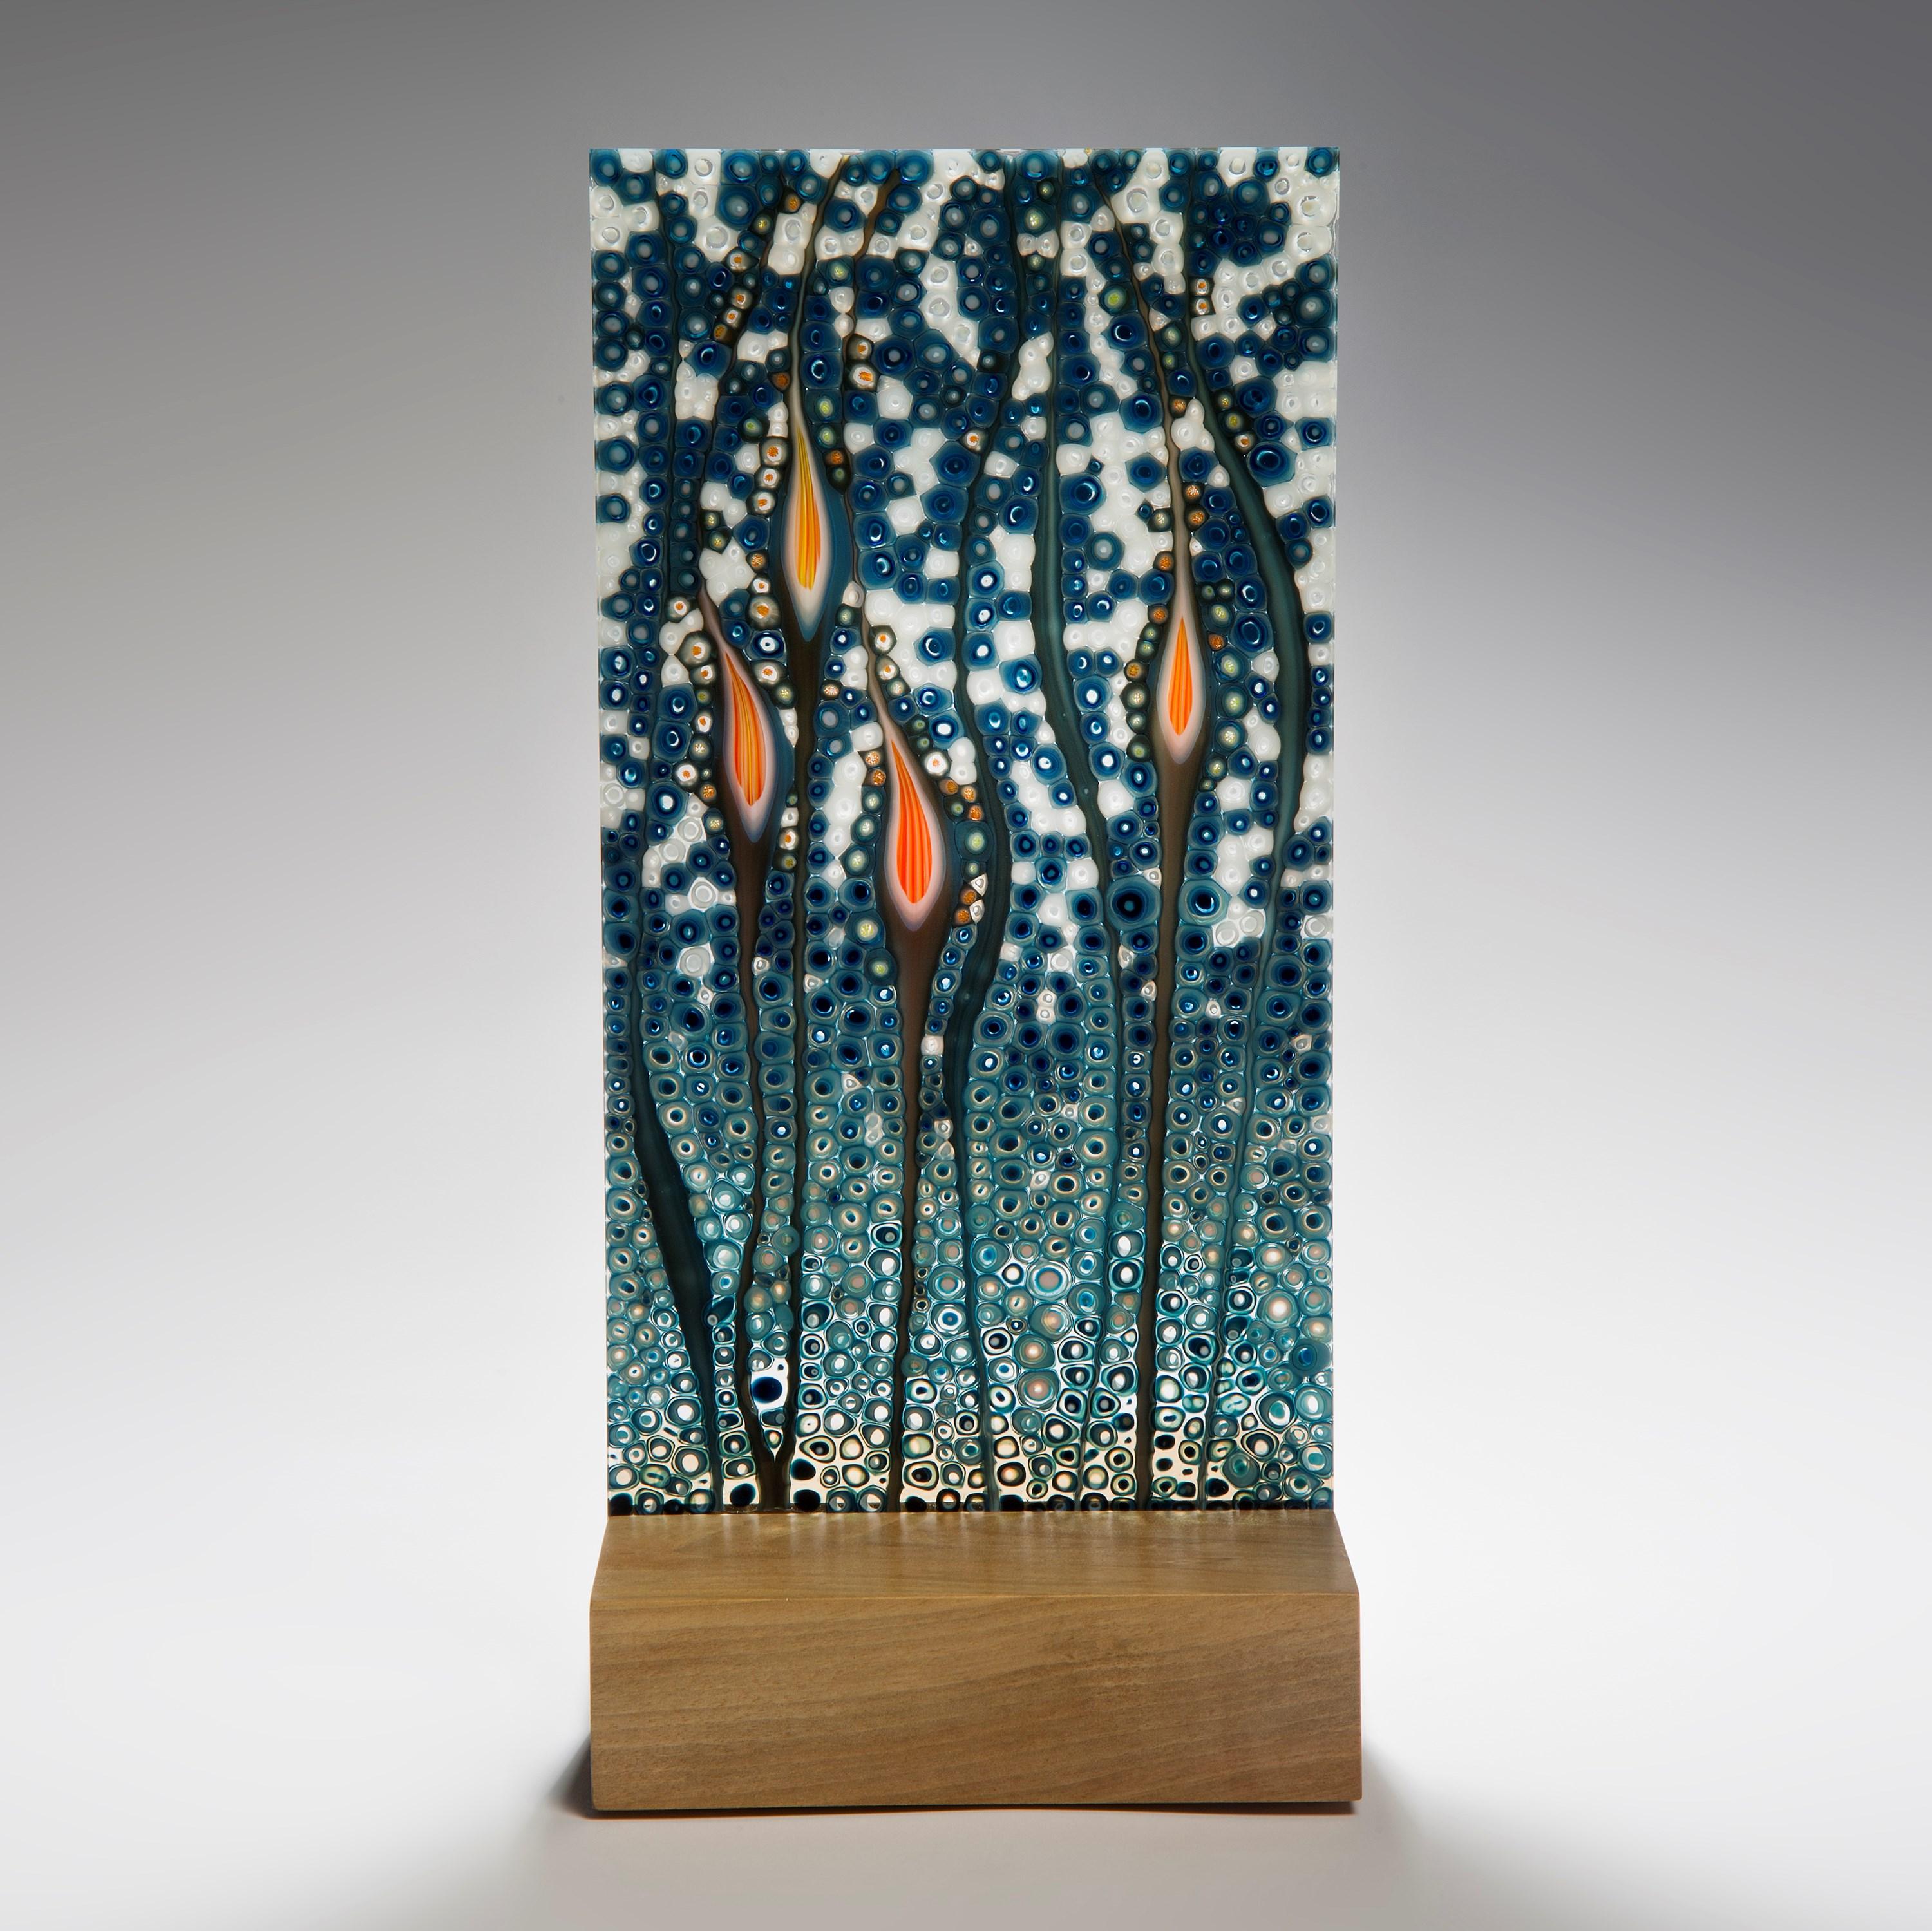 'Orientation in Petrol', is a unique glass sculpture by the Austrian artist Sandra A. Fuchs. Created in petrol blue, teal blue and vibrant orange glass. Fuchs creates her own multicolored and complex glass canes, which are then cut to create small